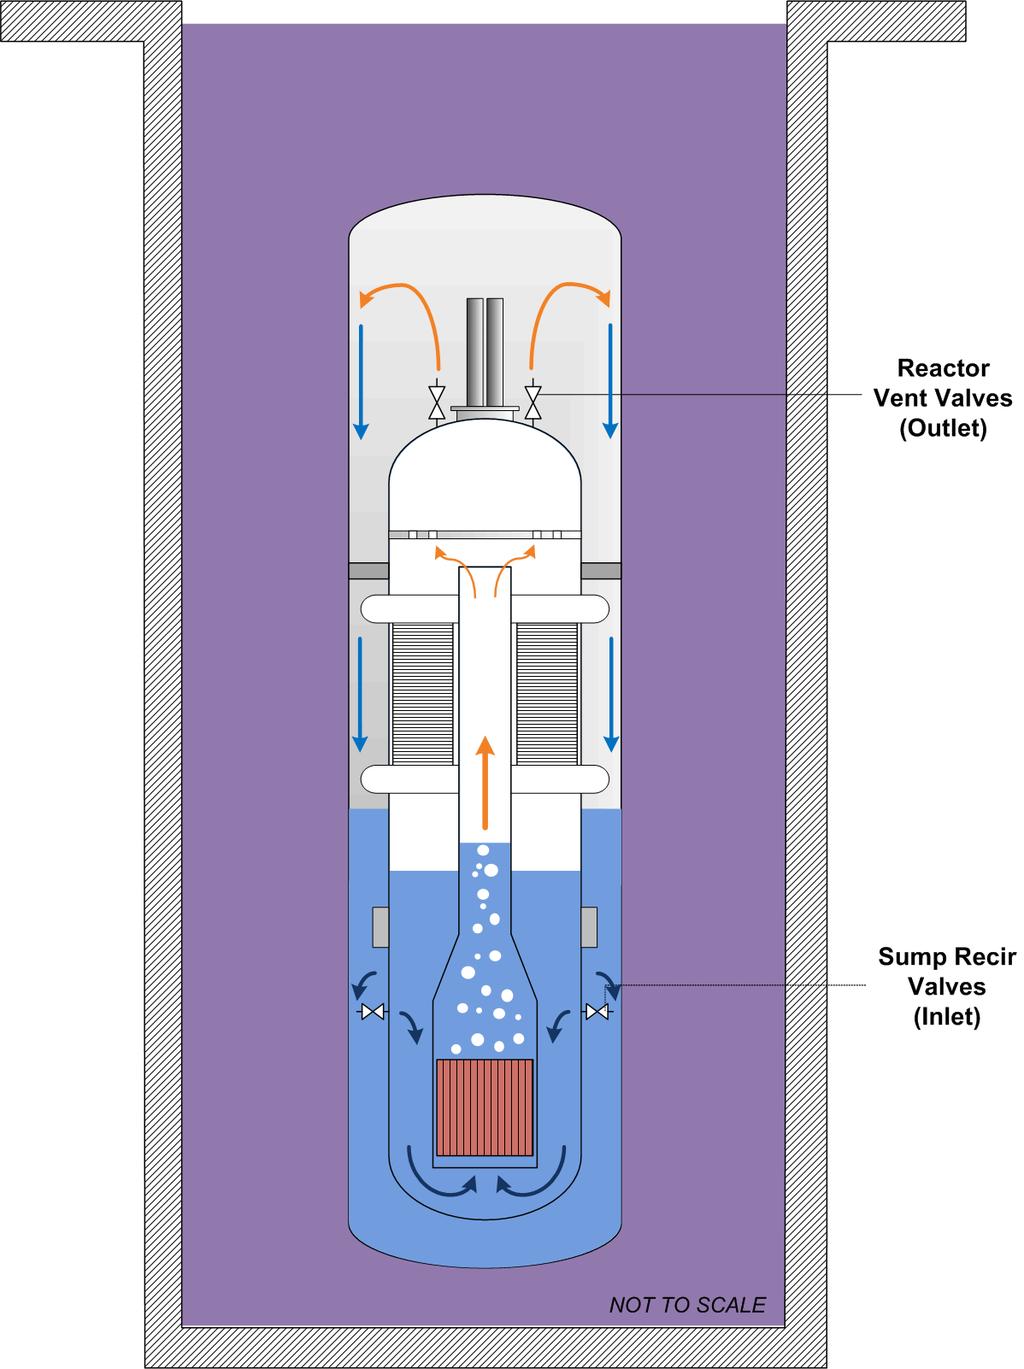 Long Term Decay Heat Removal Provides a means of removing core decay heat and limits containment pressure by: Steam Condensation Convective Heat Transfer Heat Conduction Sump Recirculation Reactor